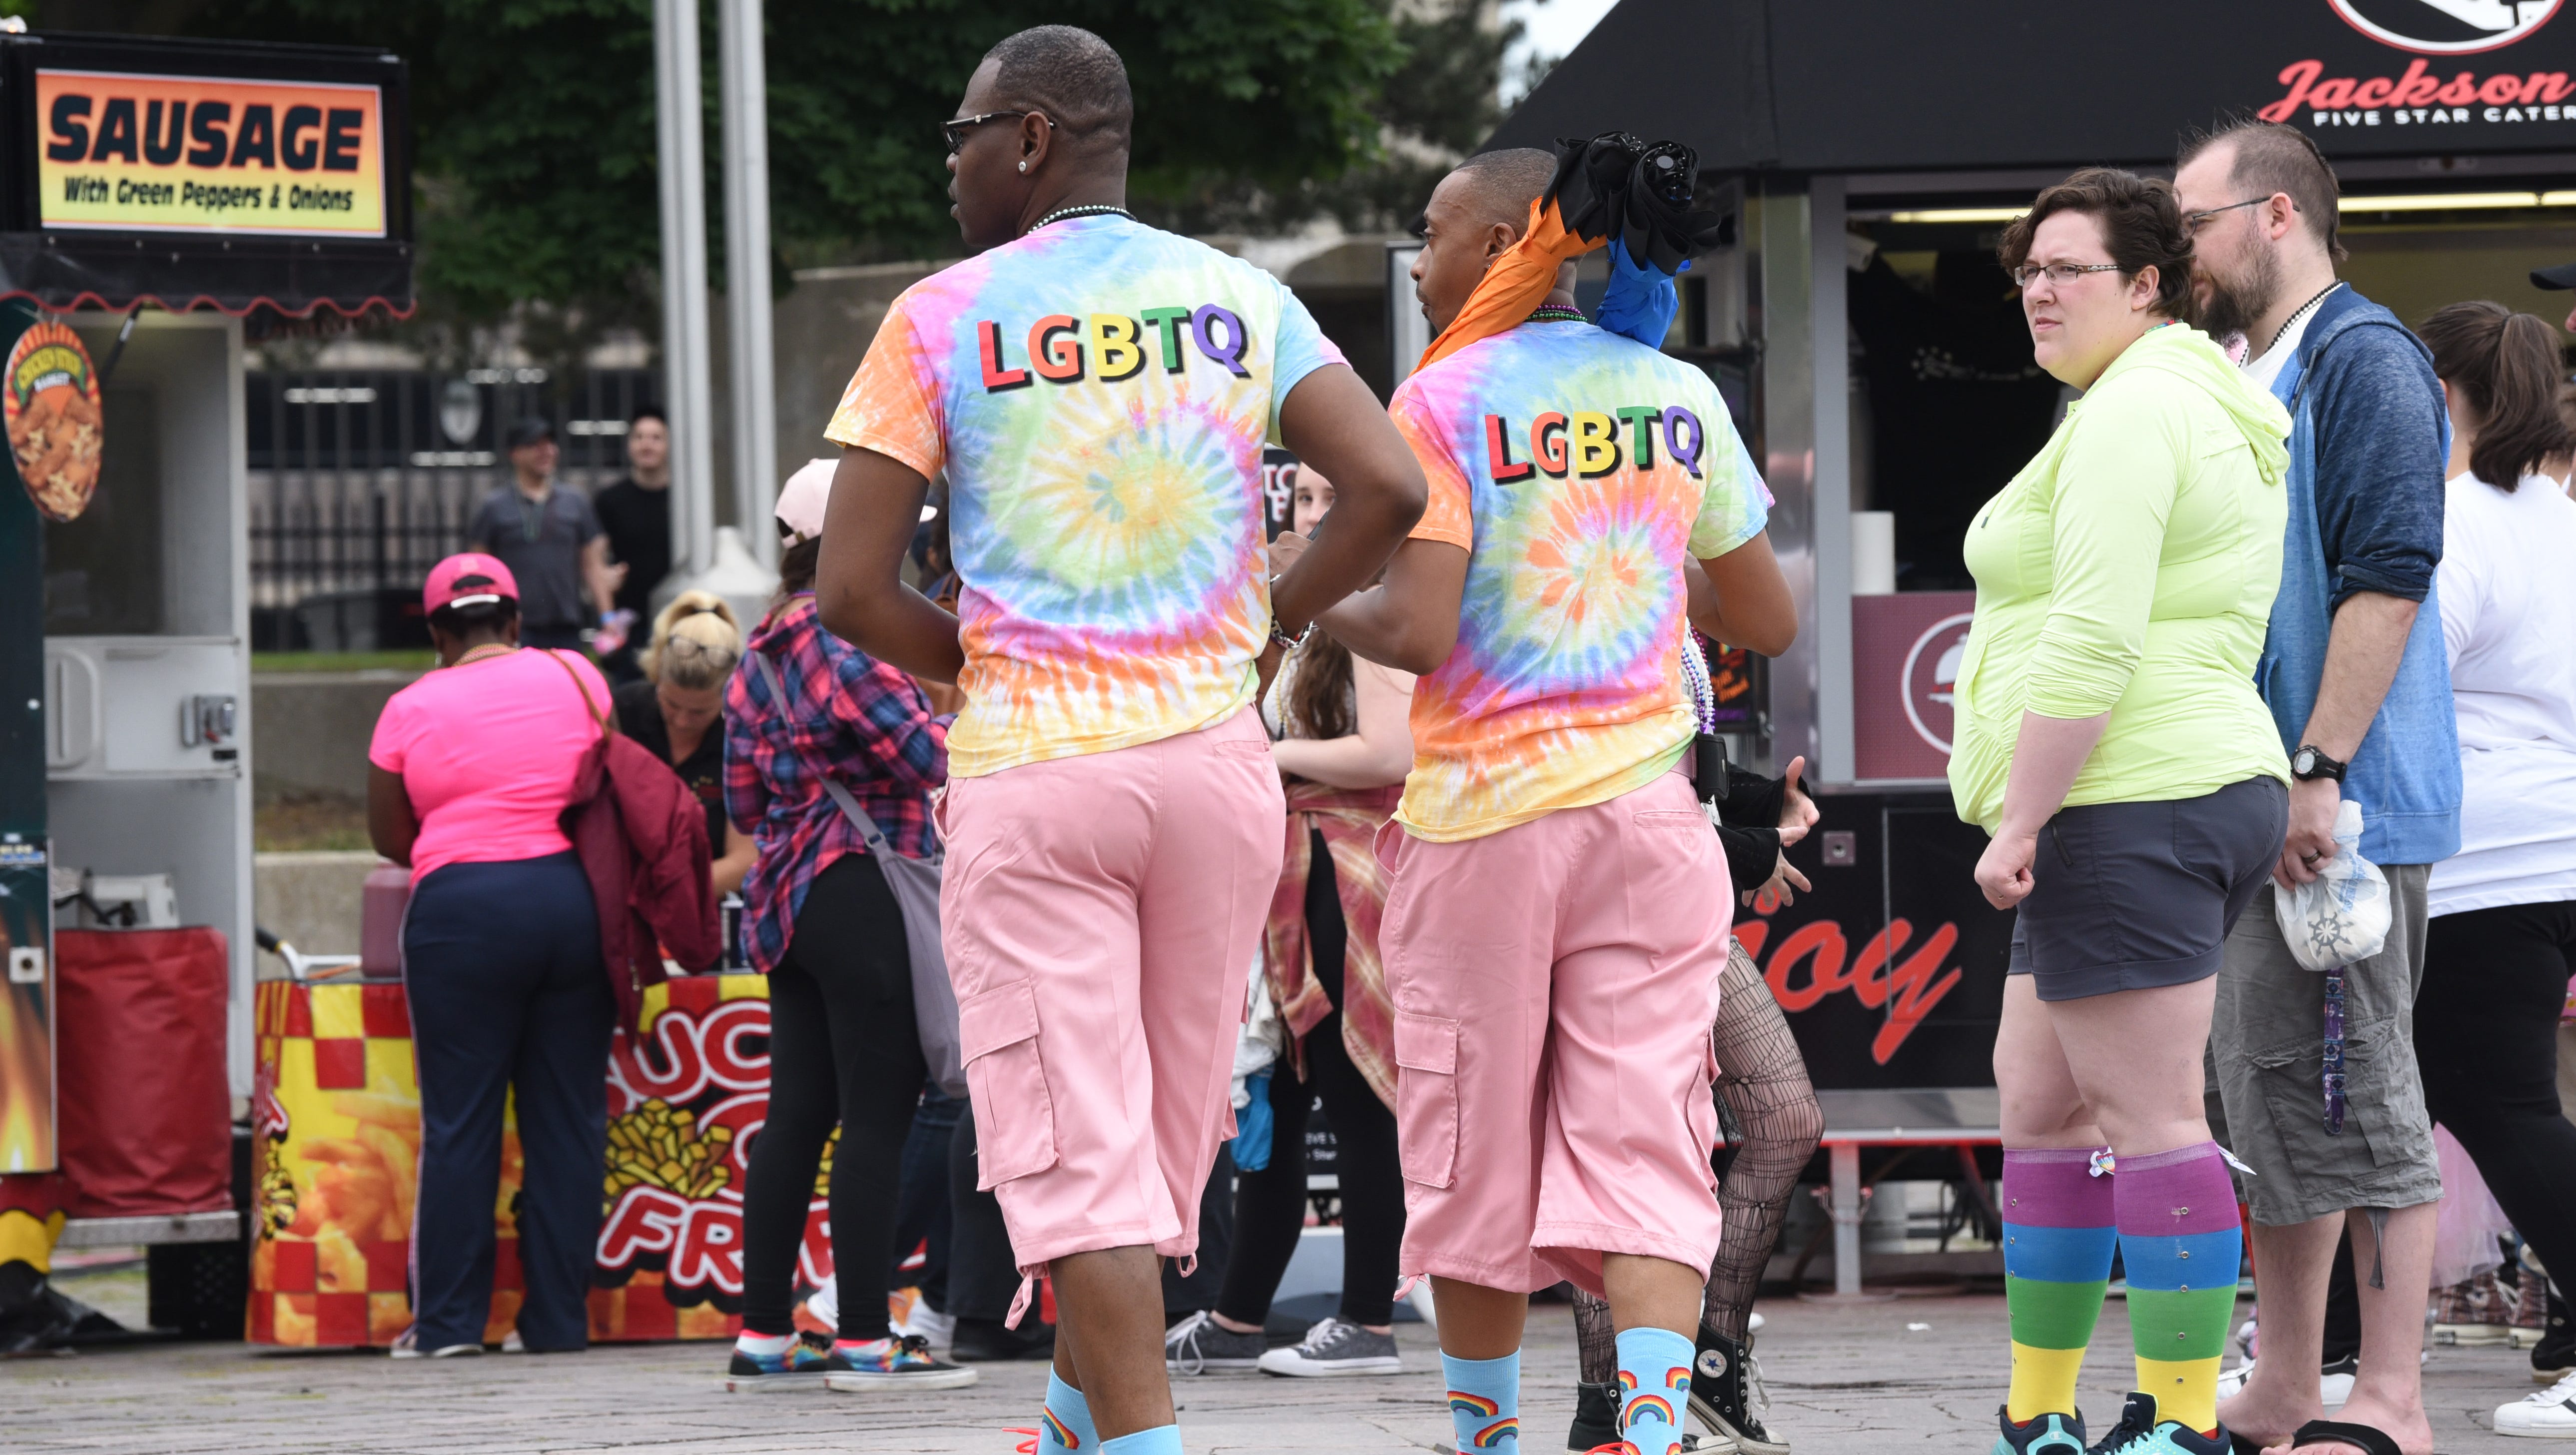 The LGBTQ community shows their colors at the Motor City Pride festival held at Hart Plaza in Detroit on Saturday, June 9, 2018.